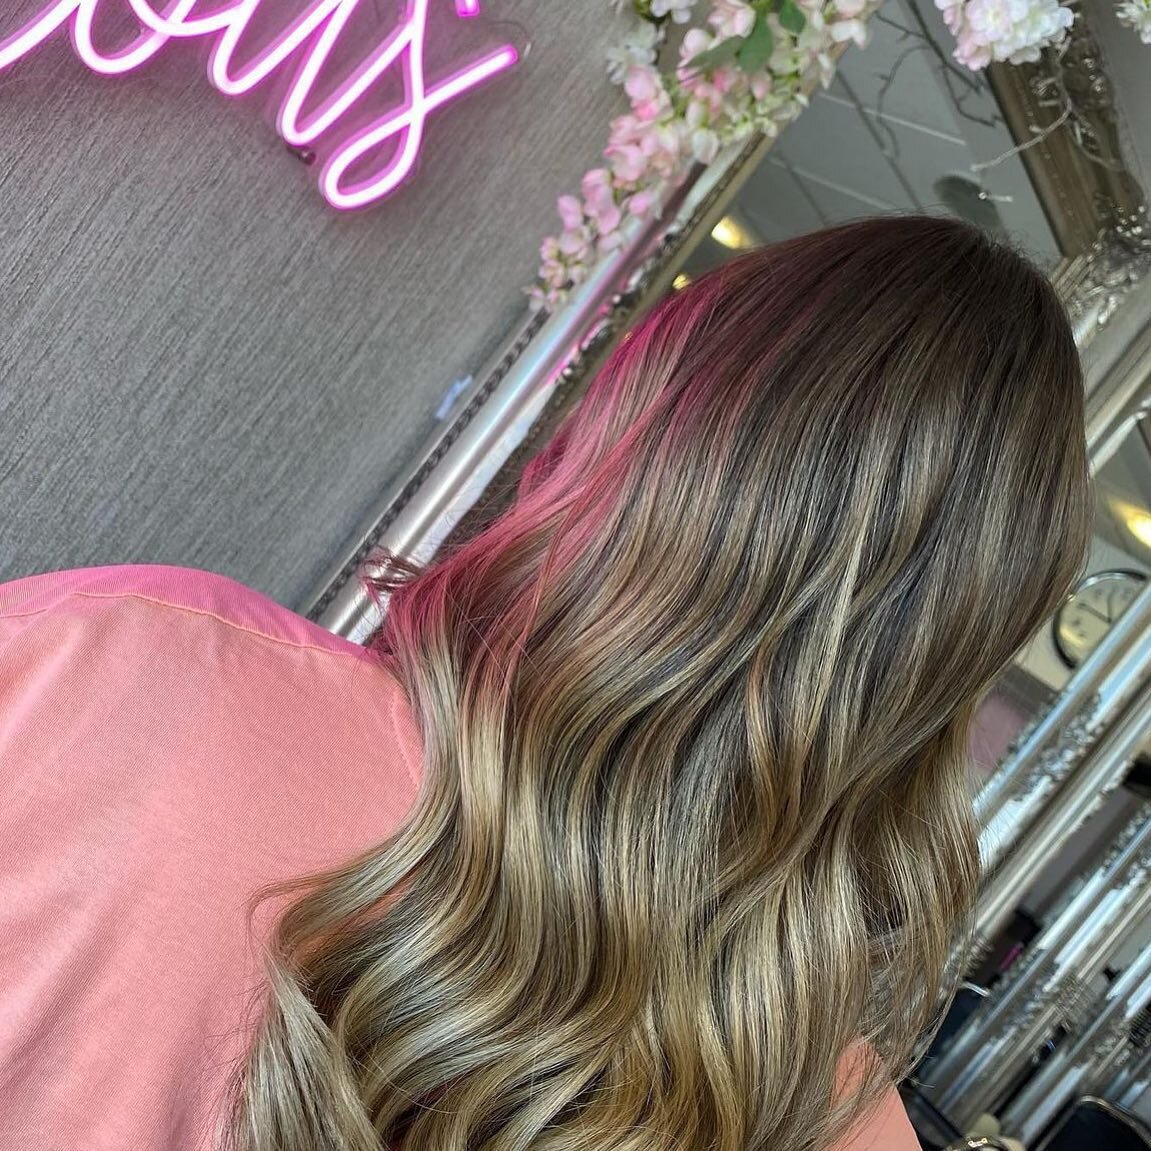 Beautifully blended by @beau_mane_ 🤤 for appointments with Nia you can call/book online or Dm @beau_mane_ 🤍 
.
.
.
#tigicopyrightcolour #northwalessalon